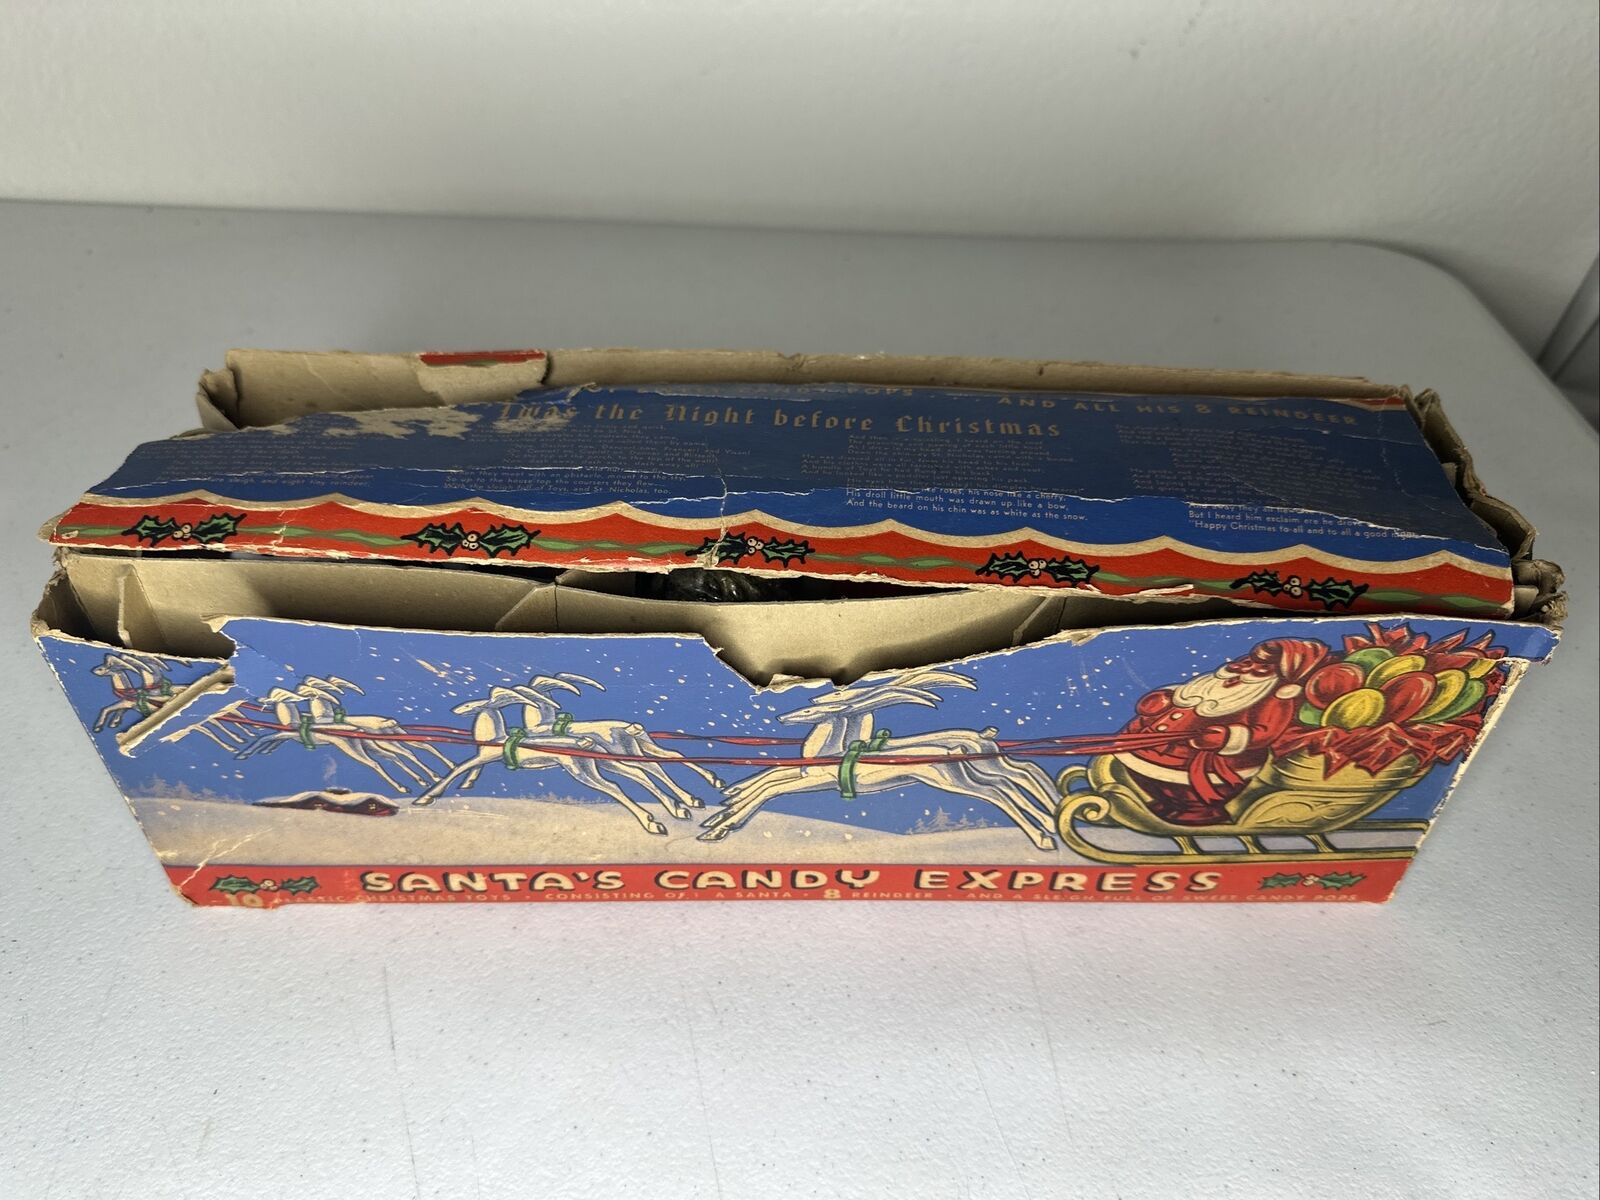 Vintage 1950s Santa's Candy Express Plastic Toy Set with Original Box - Rare Sears Collectible - TreasuTiques